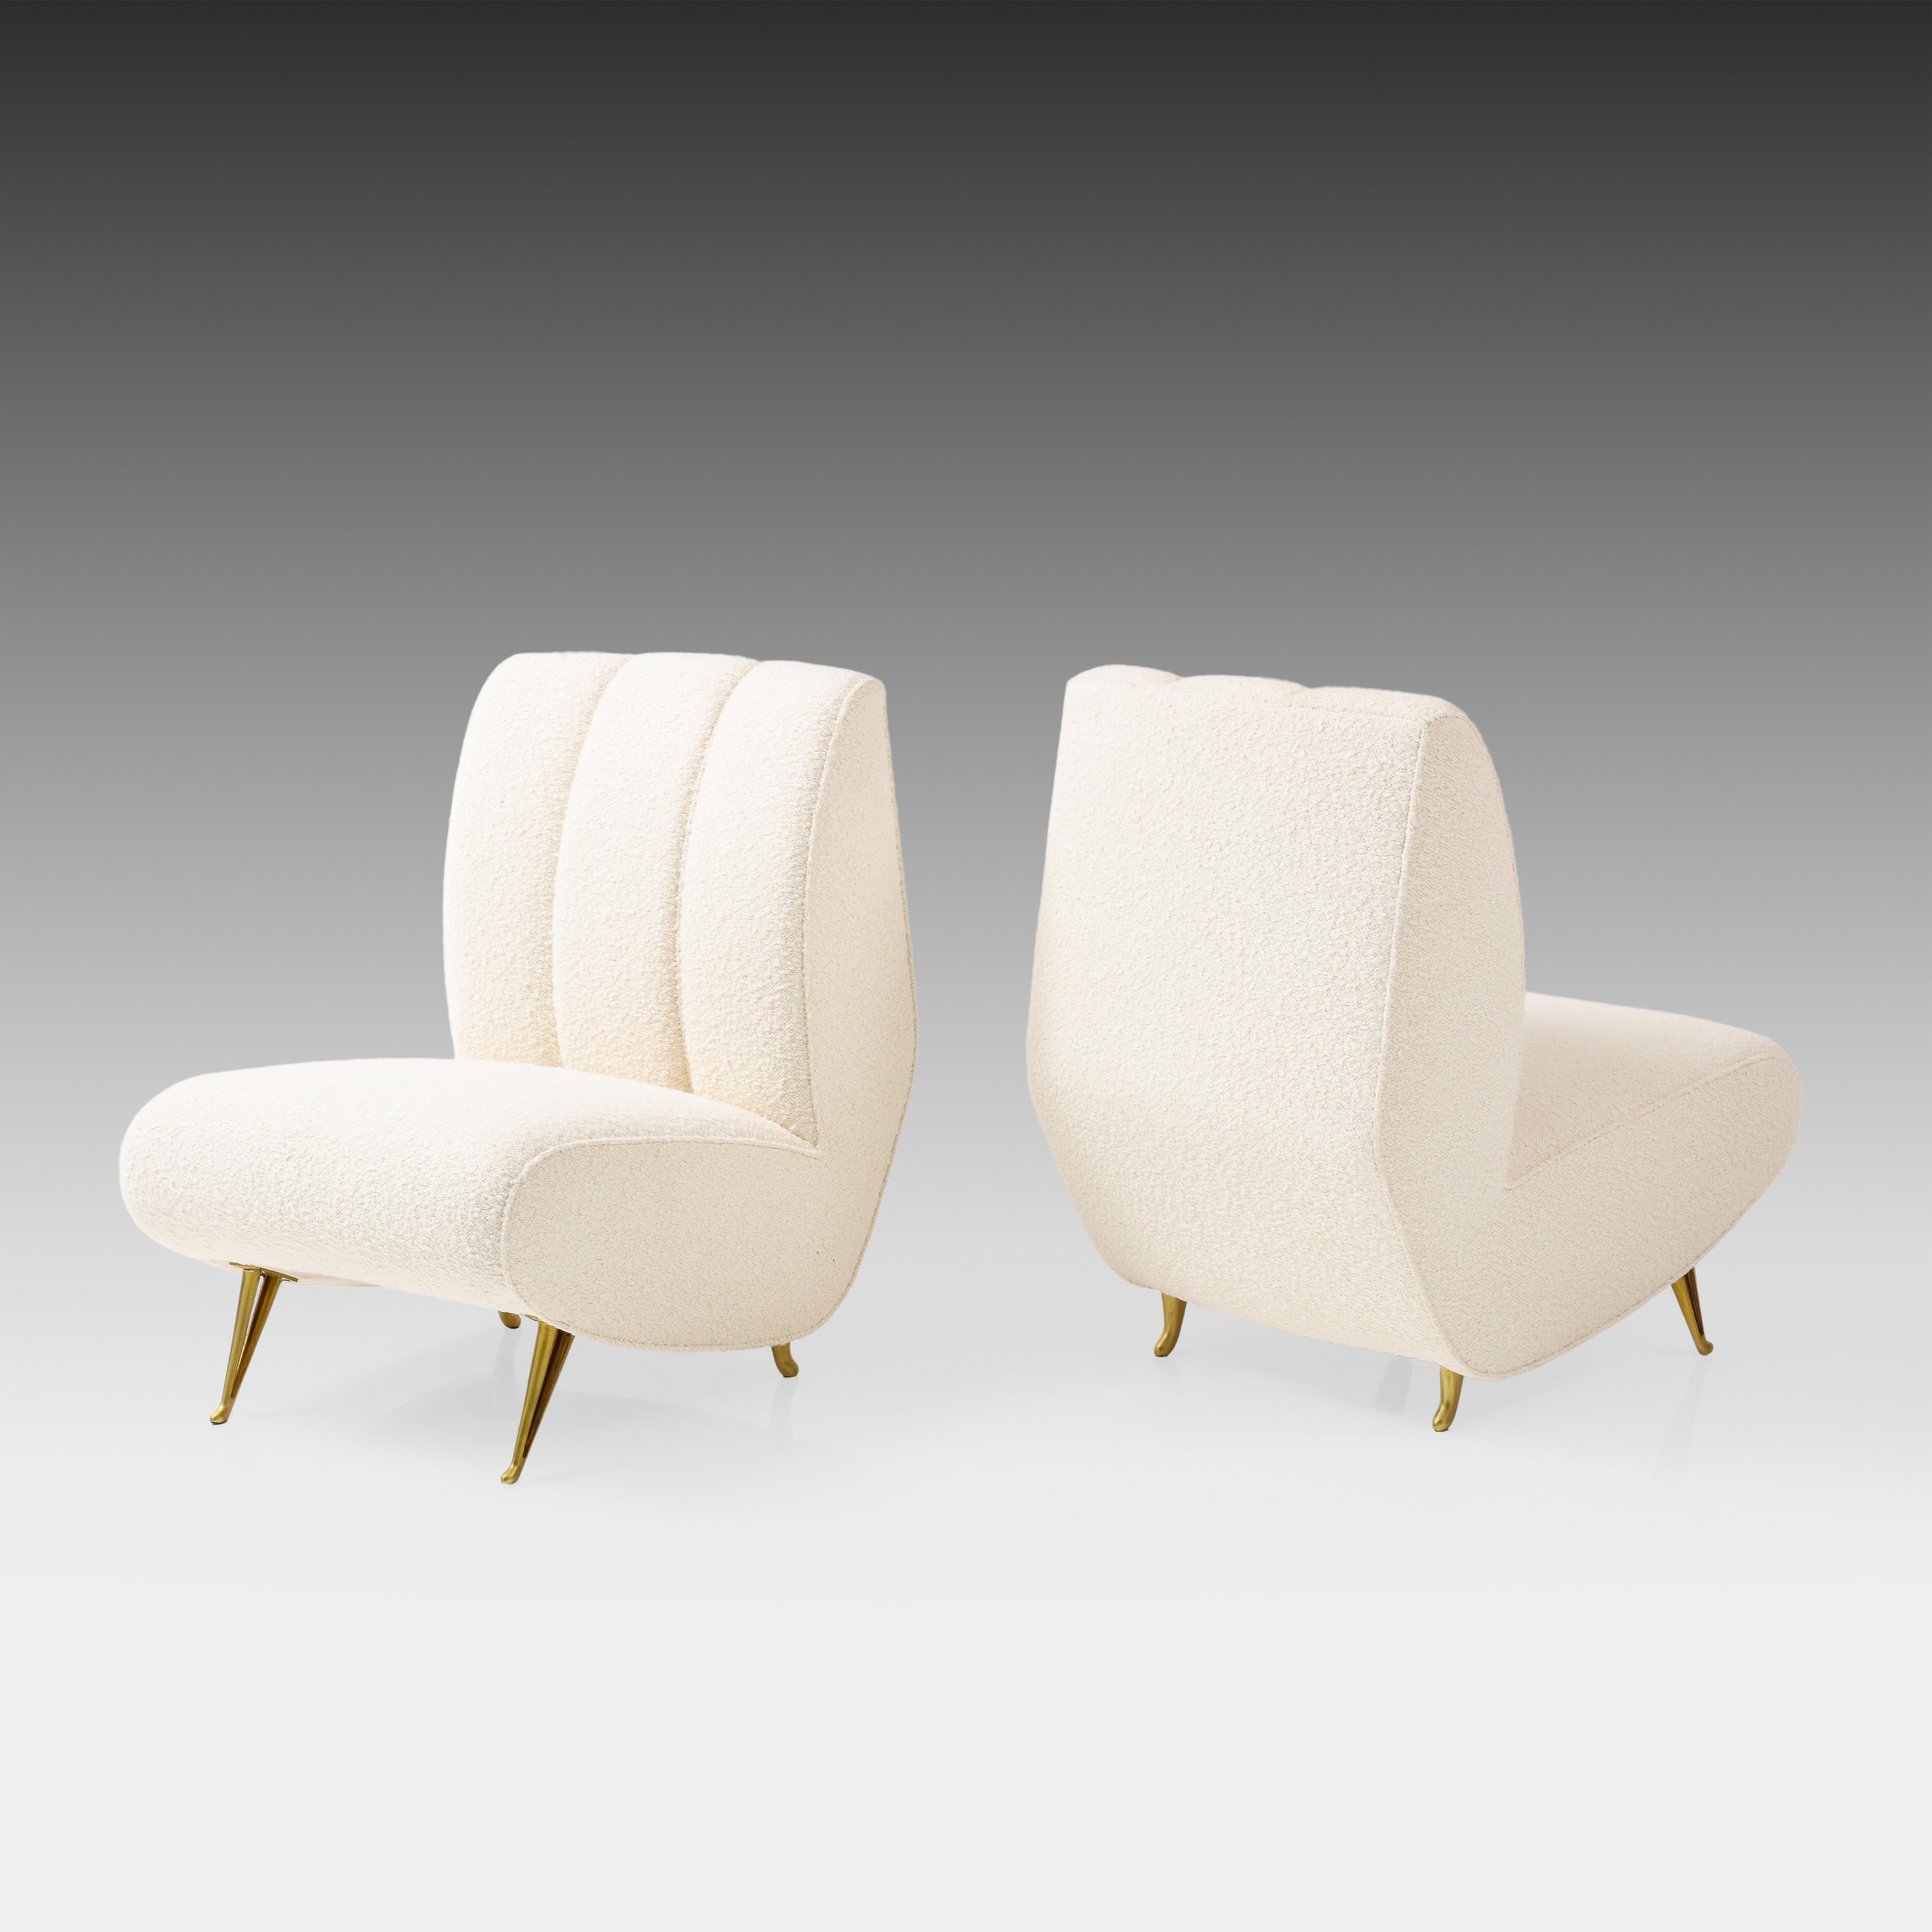 Mid-20th Century ISA Bergamo Rare Pair of Lounge or Slipper Chairs in Ivory Bouclé, Italy, 1950s For Sale